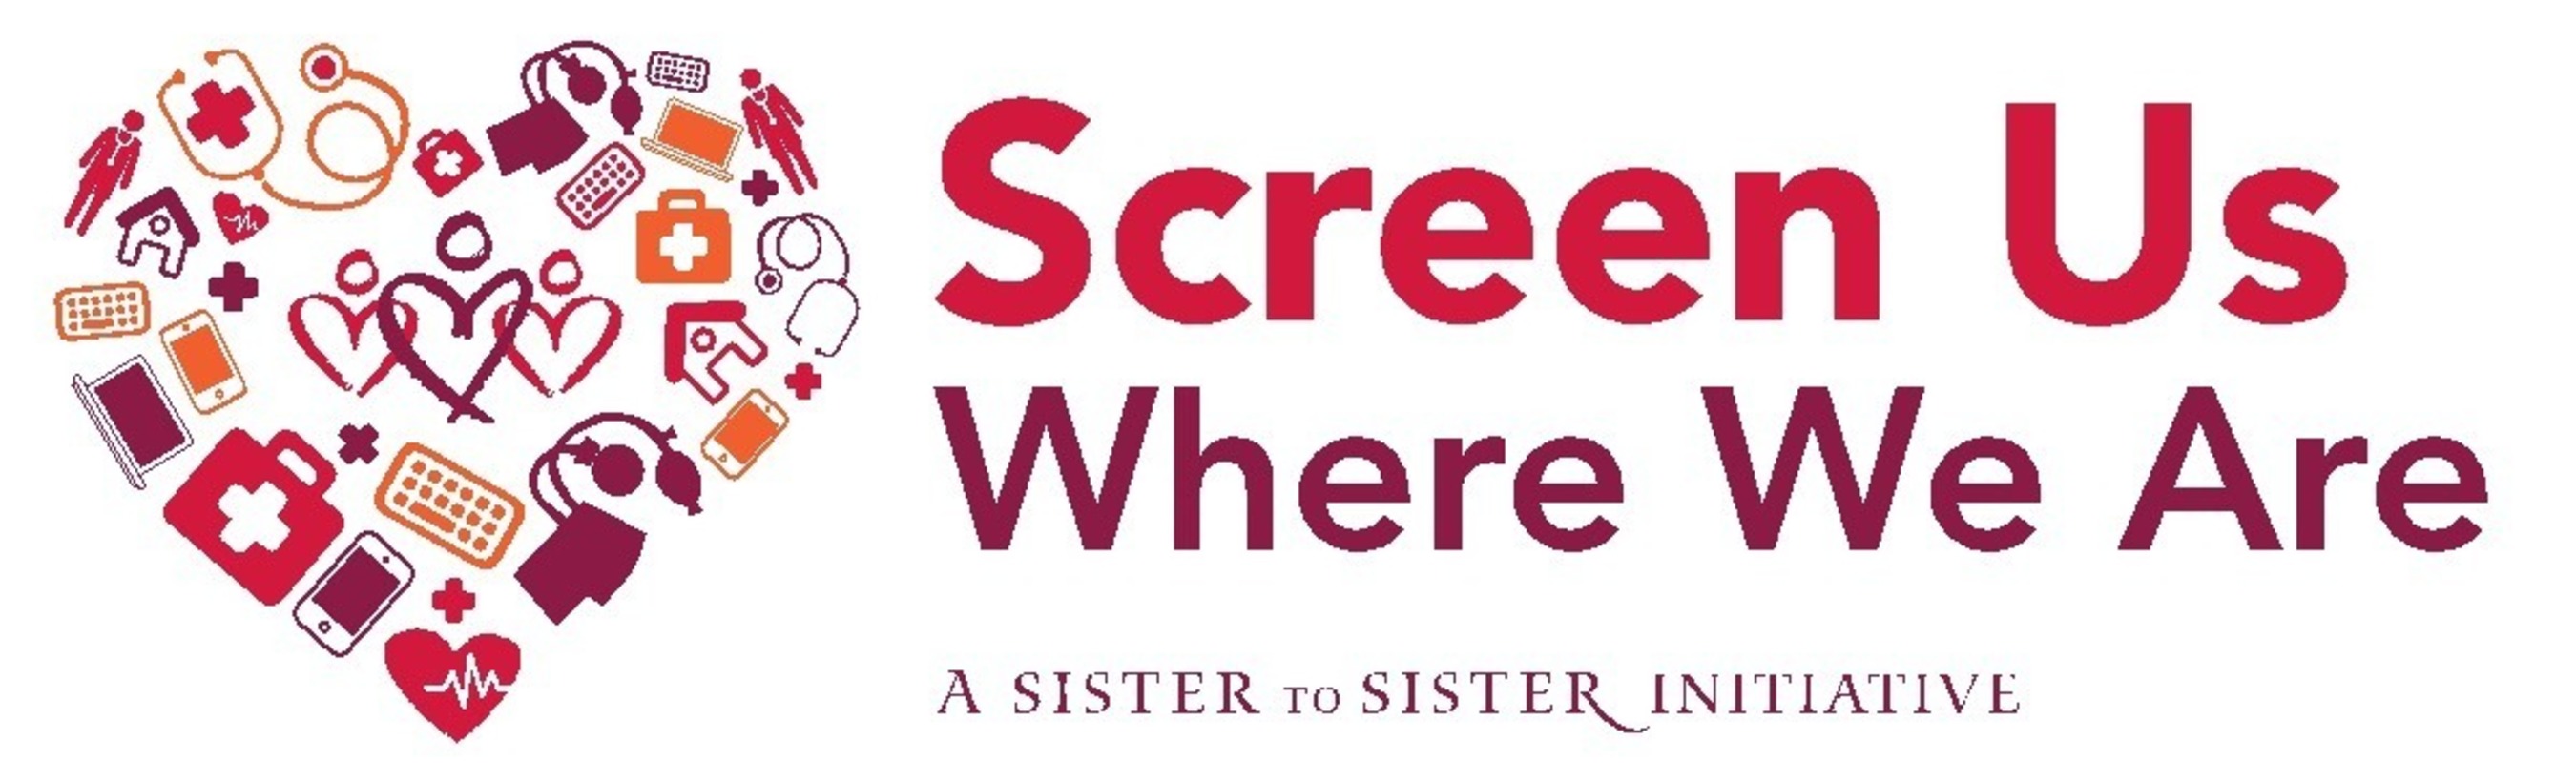 Sister to Sister Launches Groundbreaking Screen Us Where We Are Campaign. Supermodel and Women’s Advocate Emme Joins Leading Cardiologists, Women’s Health Organizations and Policymakers to Call for Heart Disease Screenings Wherever Women Seek Primary Care. (PRNewsFoto/Sister to Sister)